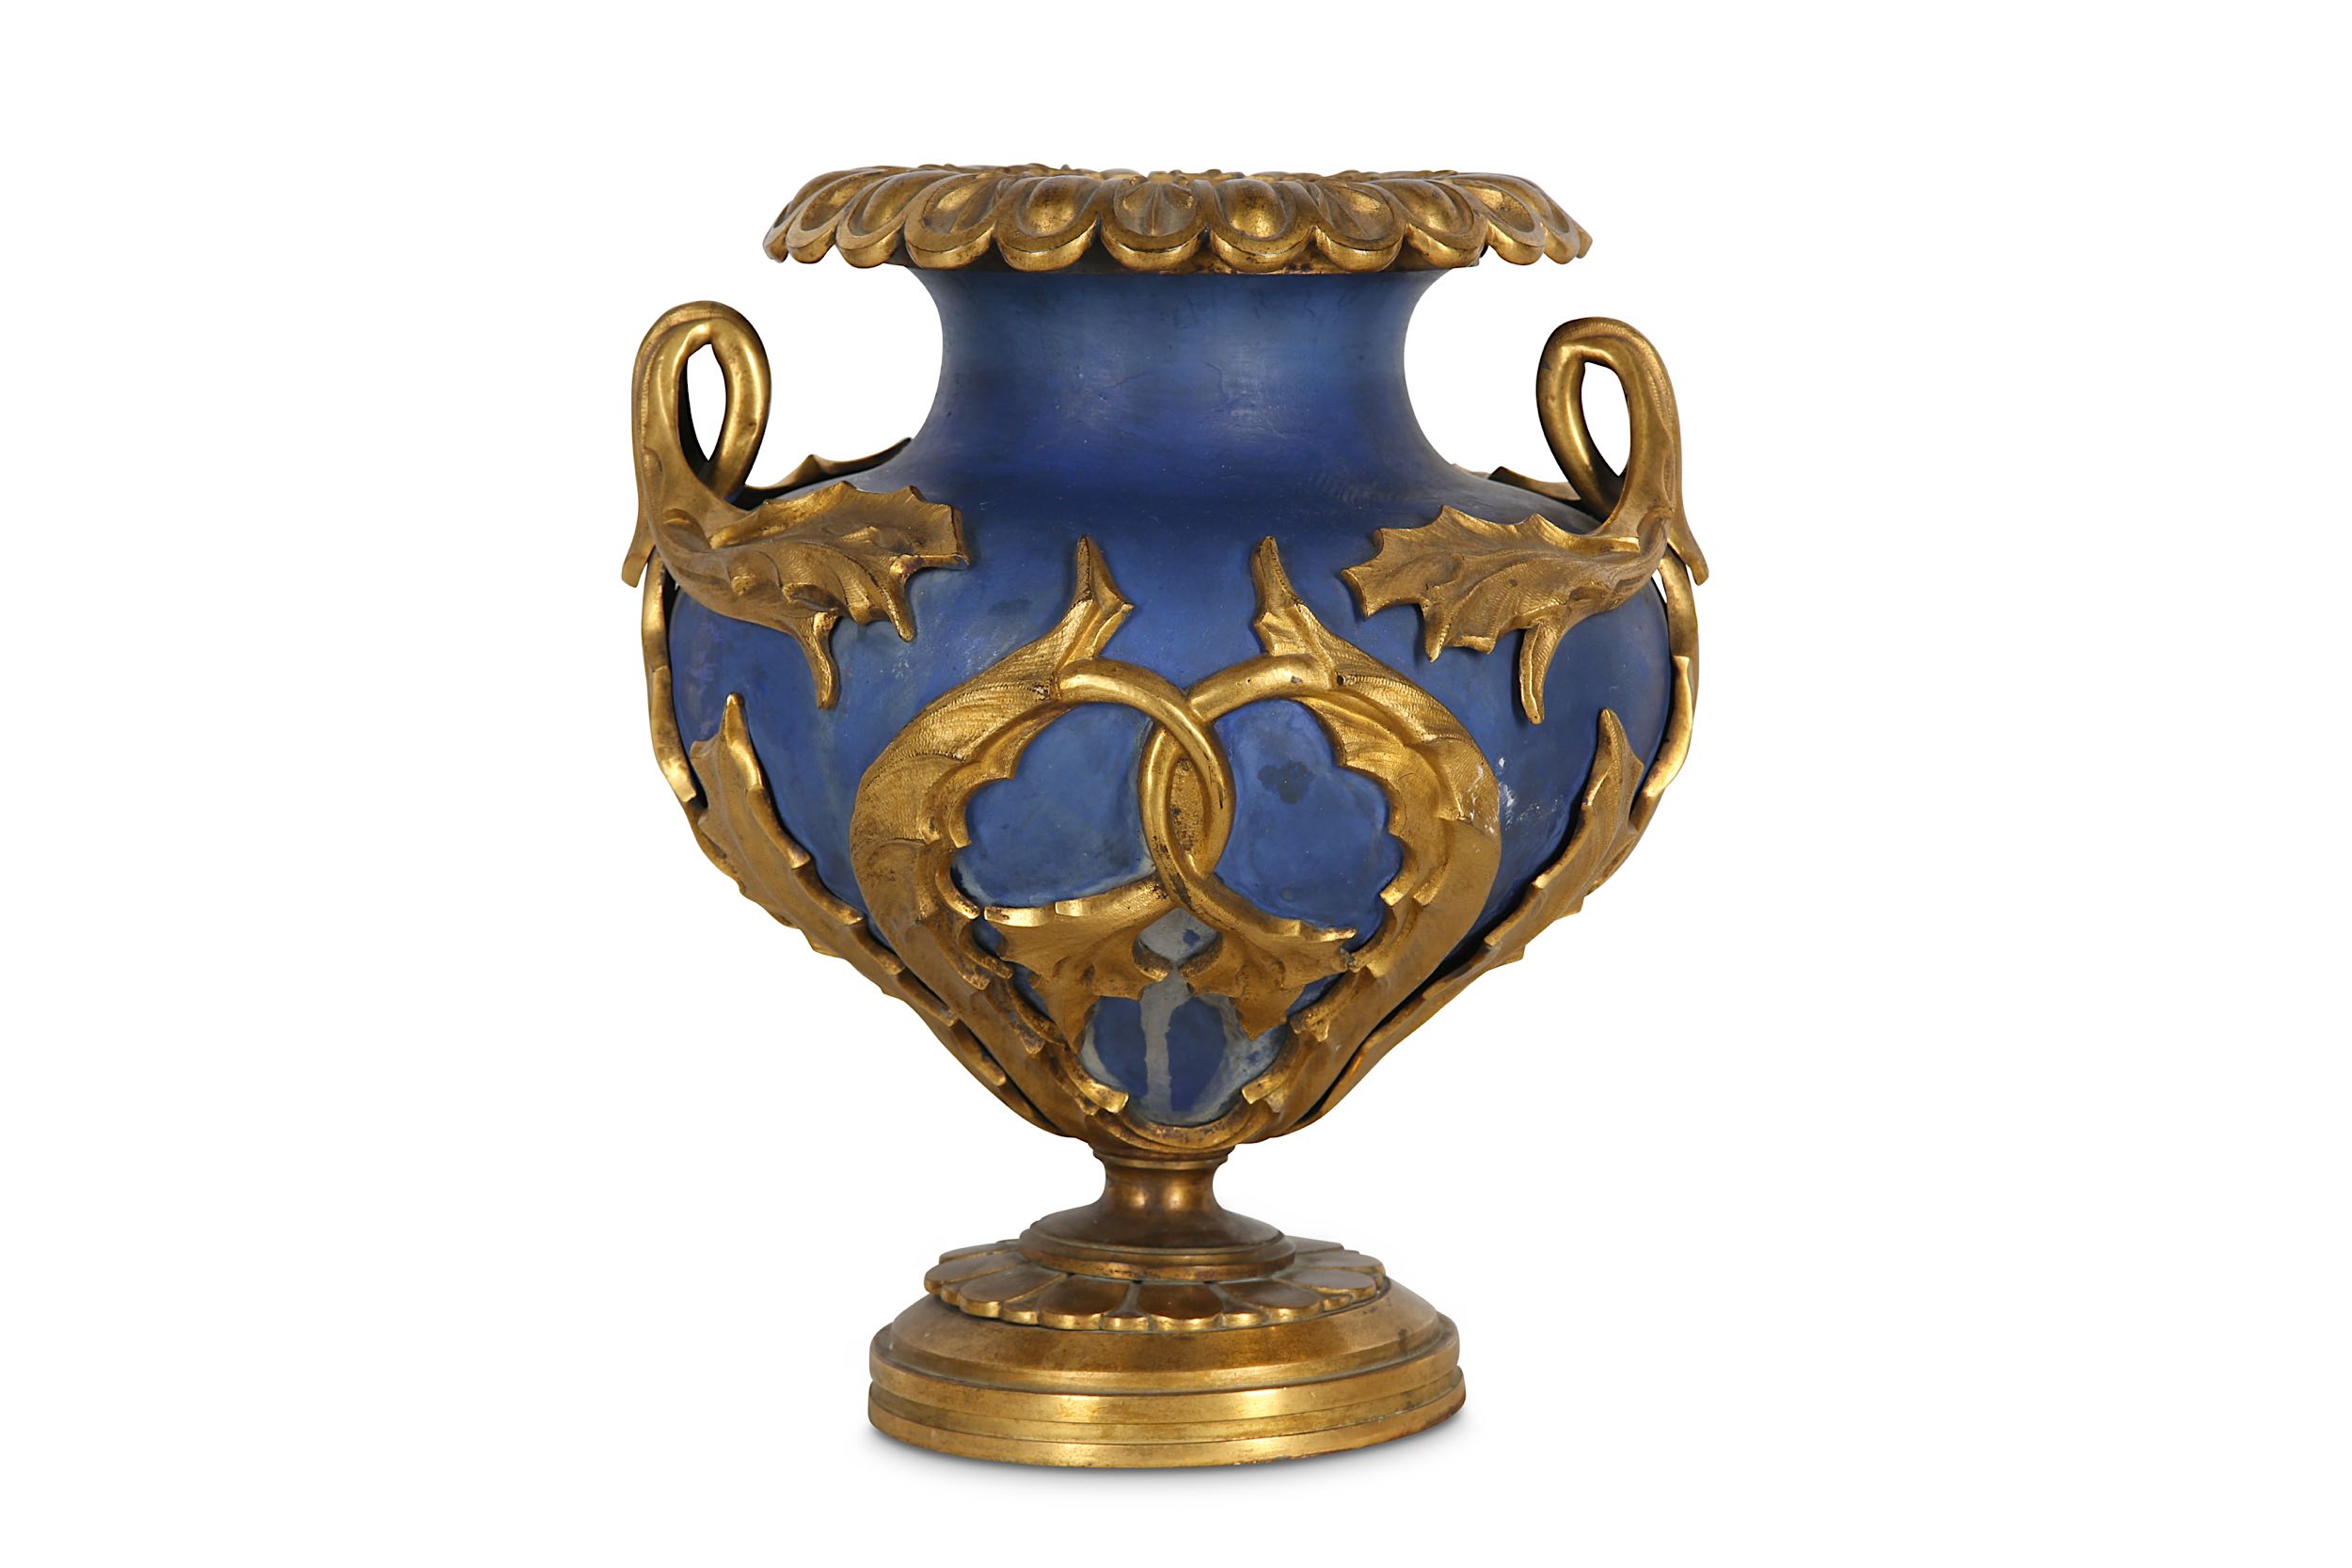 A LOUIS XVI STYLE BLUE PORCELAIN AND GILT BRONZE MOUNTED URN - Image 3 of 4